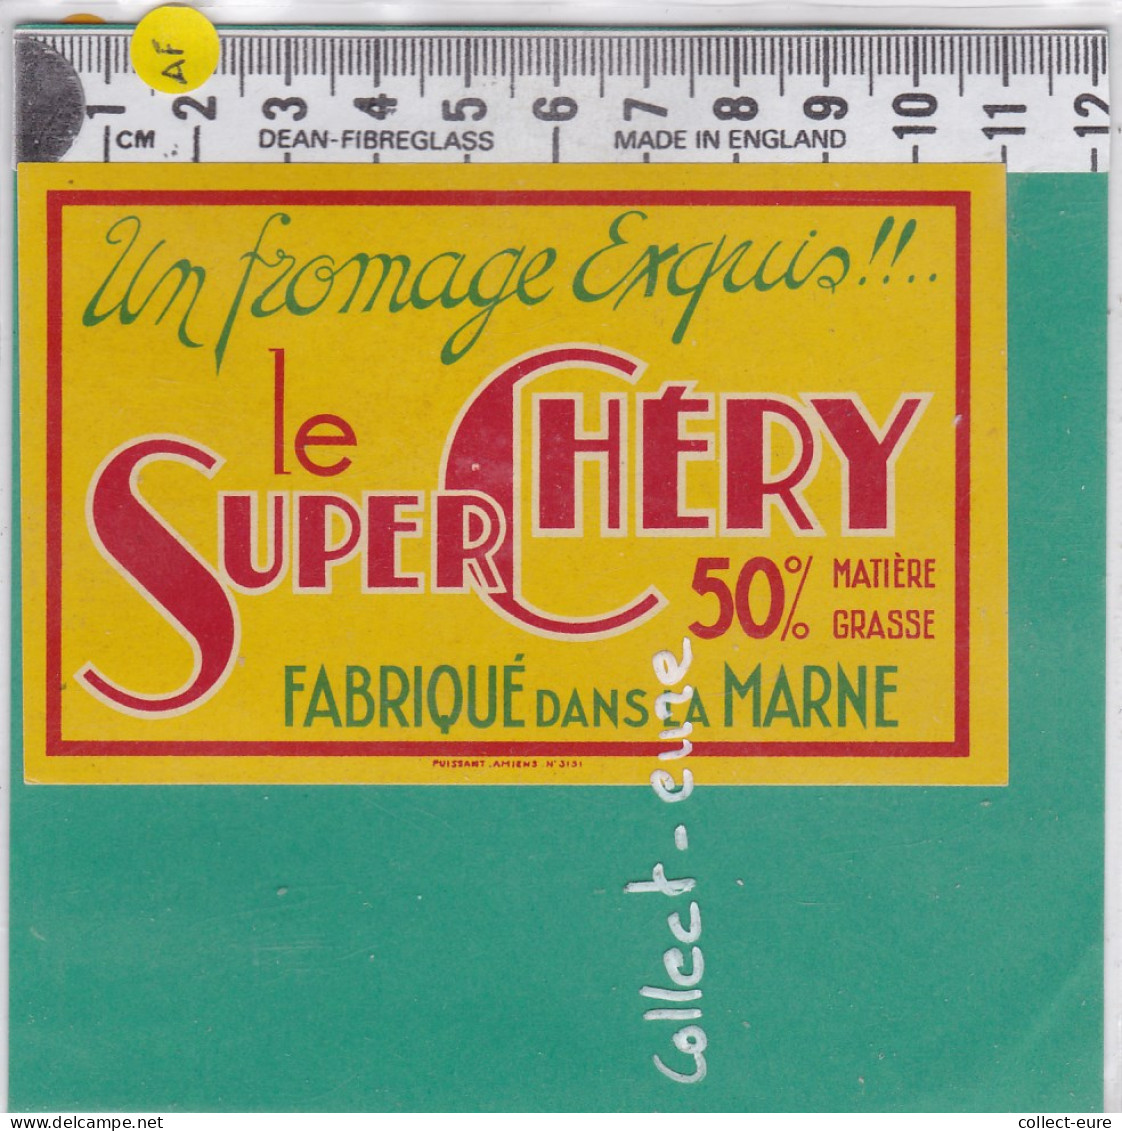 C1224 FROMAGE EXQUIS LE SUPER CHERY MARNE 50 % - Kaas